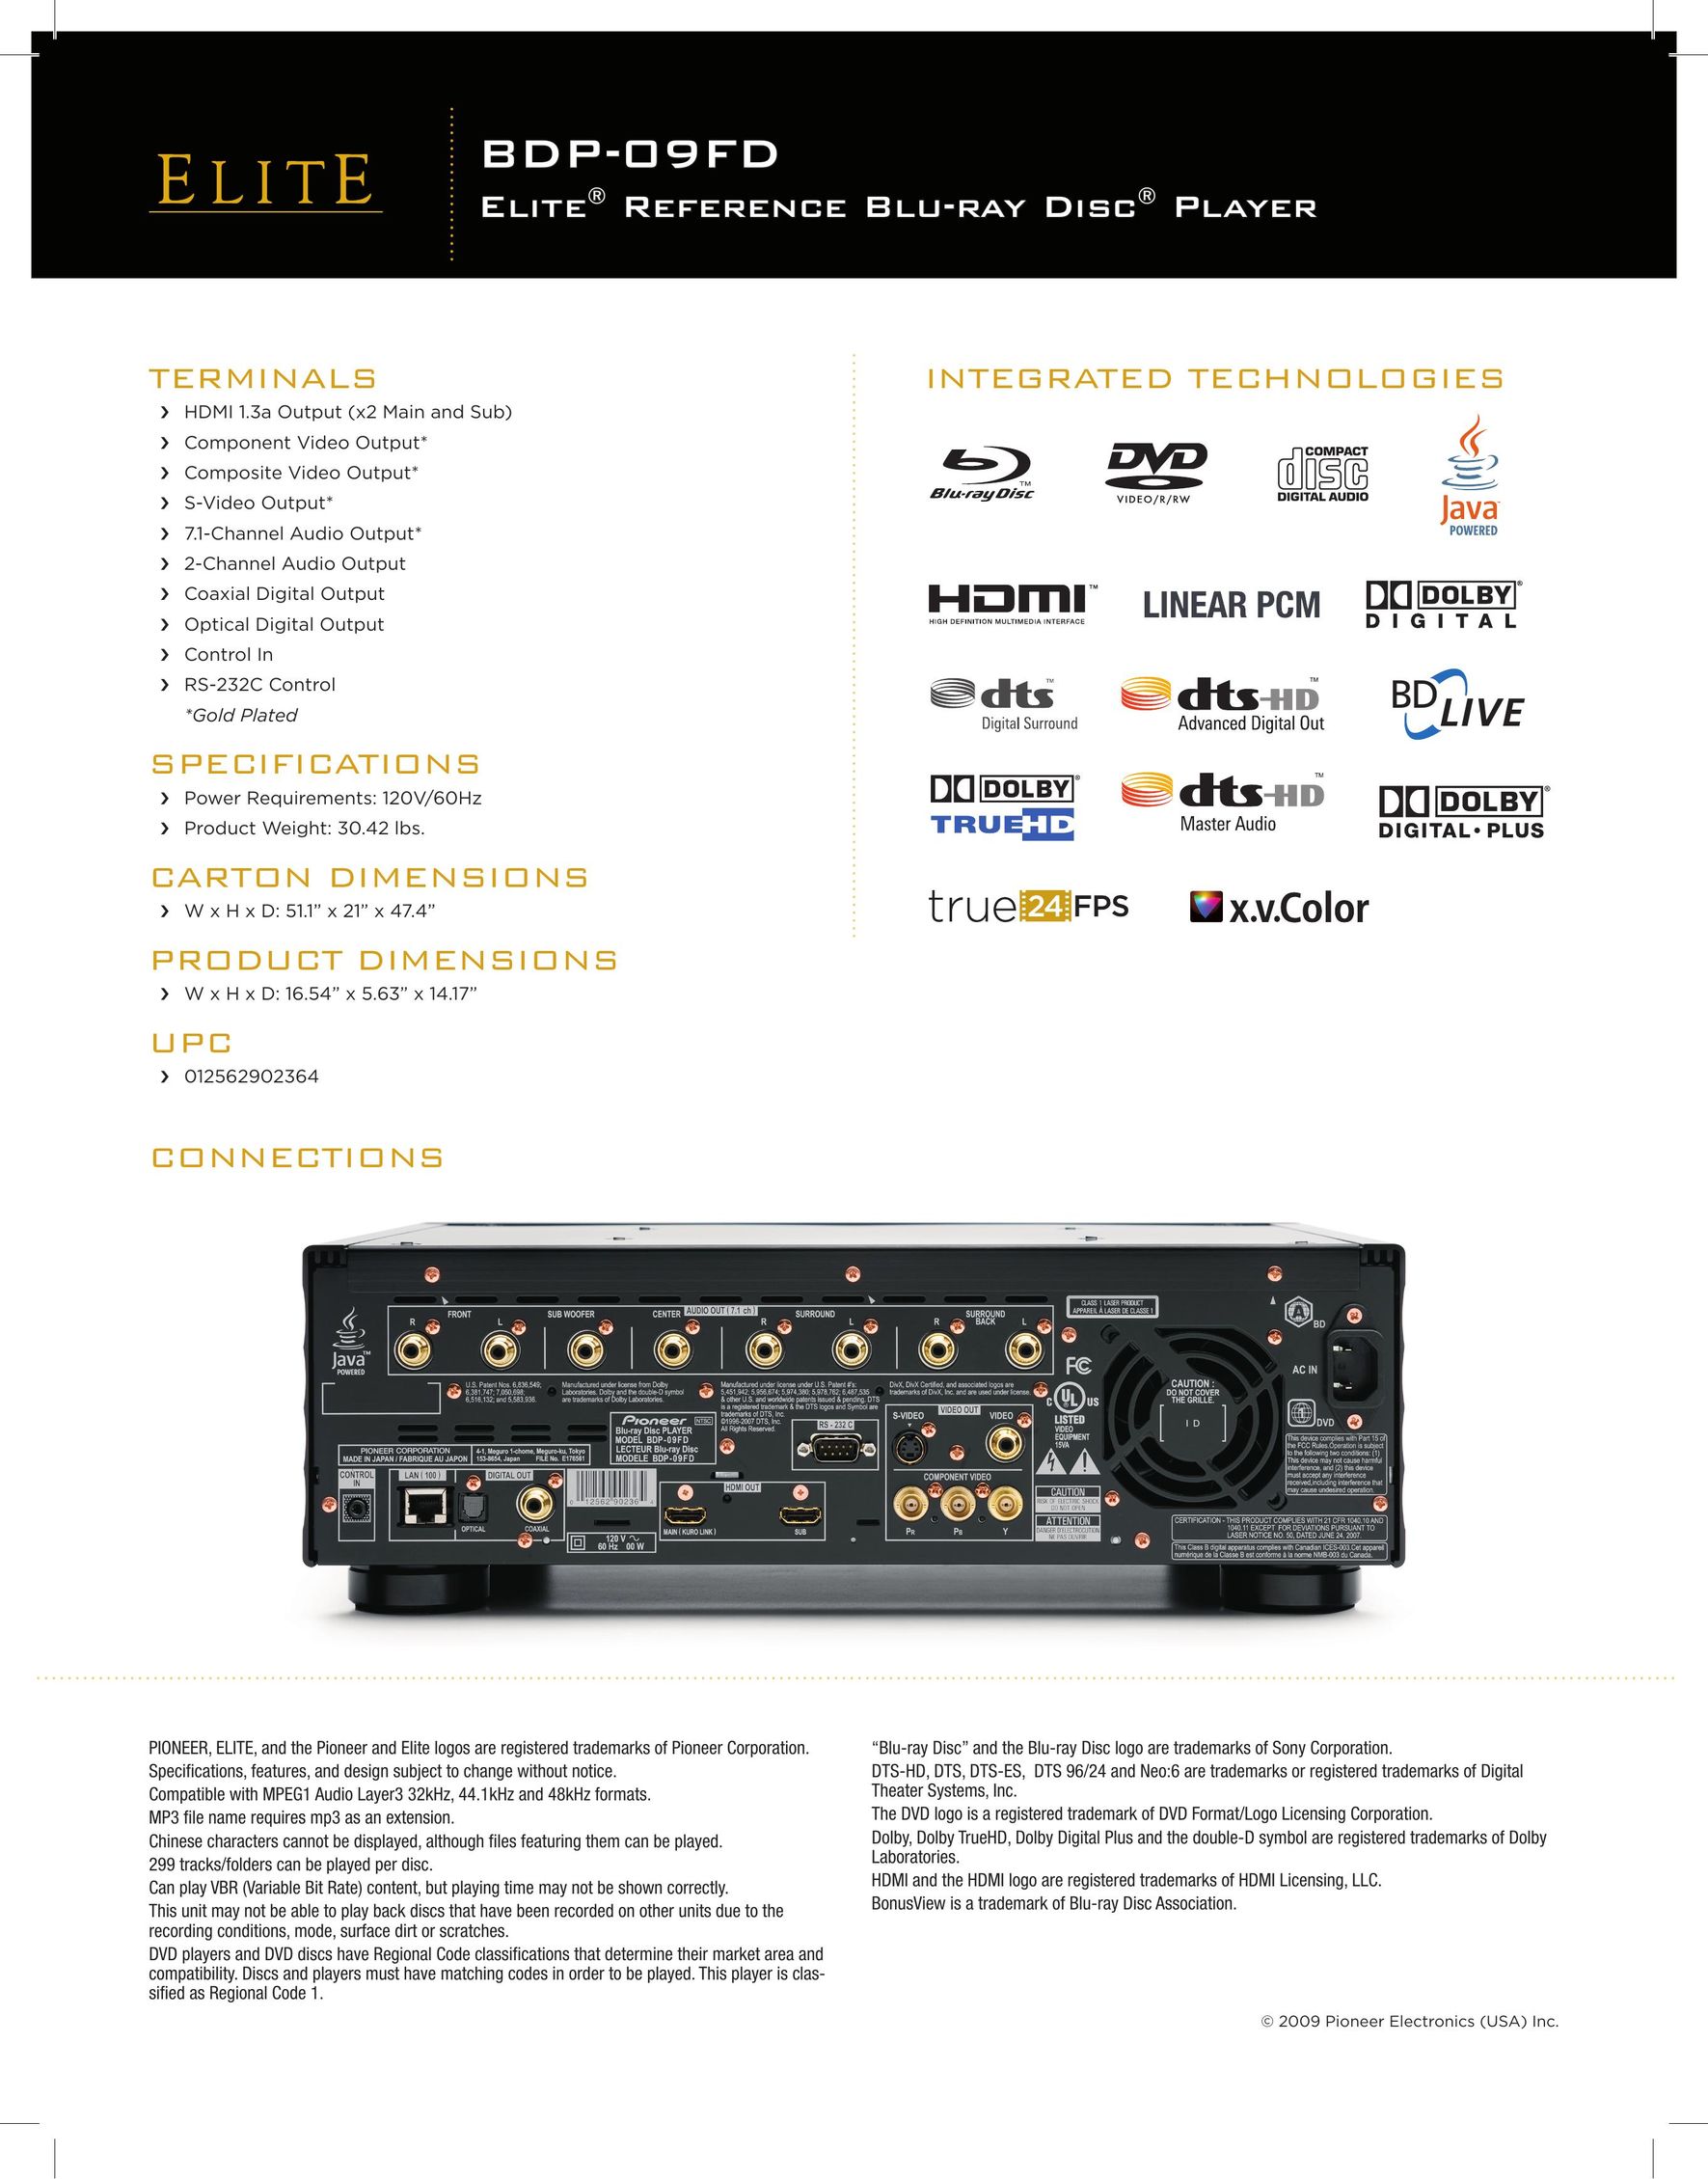 Elite BDP-09FD Blu-ray Player User Manual (Page 2)